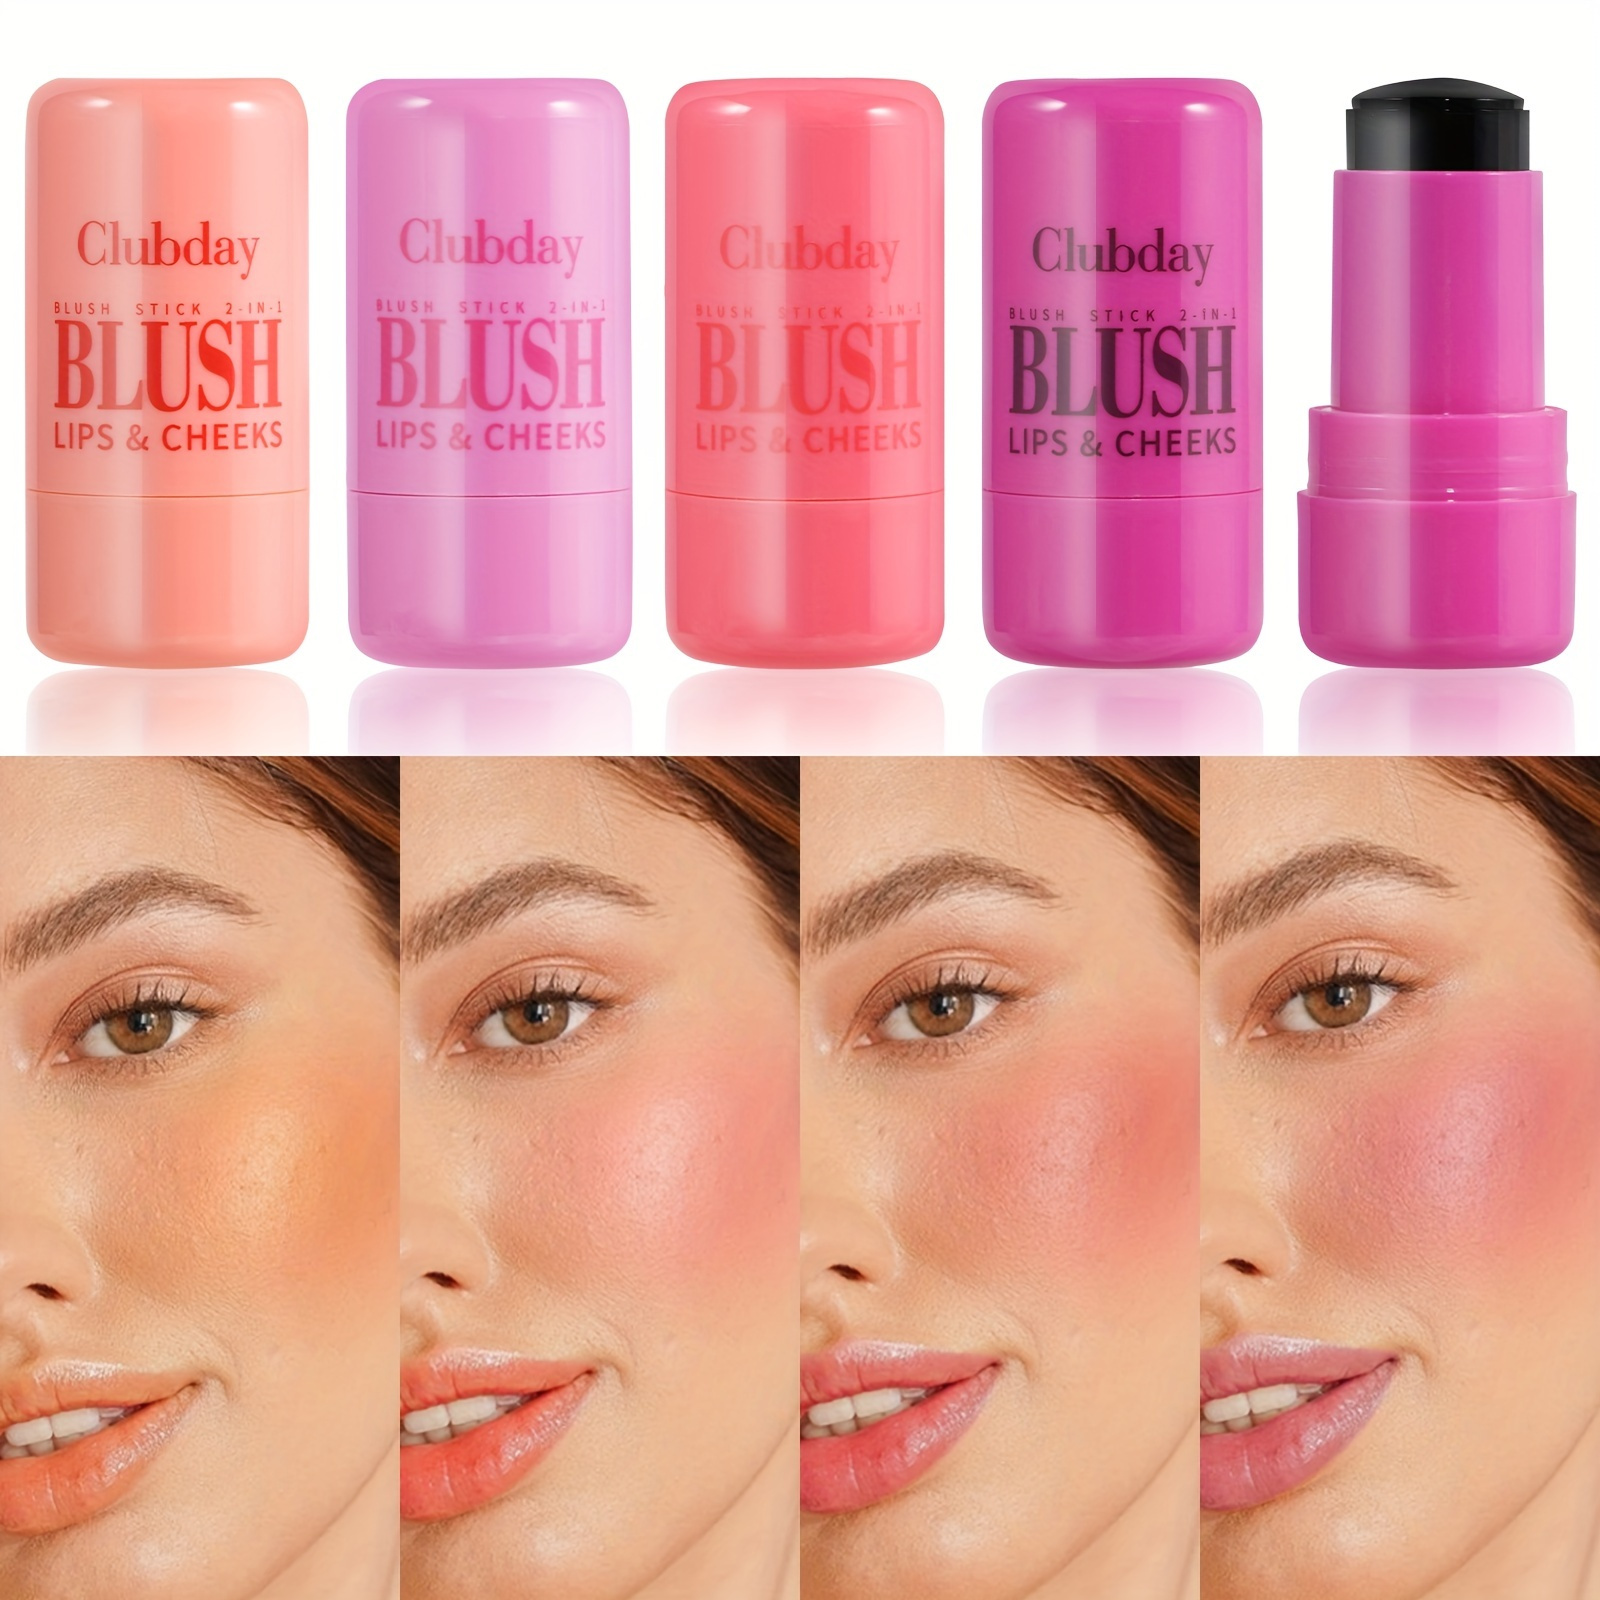 

Clubday Jelly Blush Set - Cute Bear Packaging, Waterproof, Natural Look For All Skin Tones, Easy Build Color